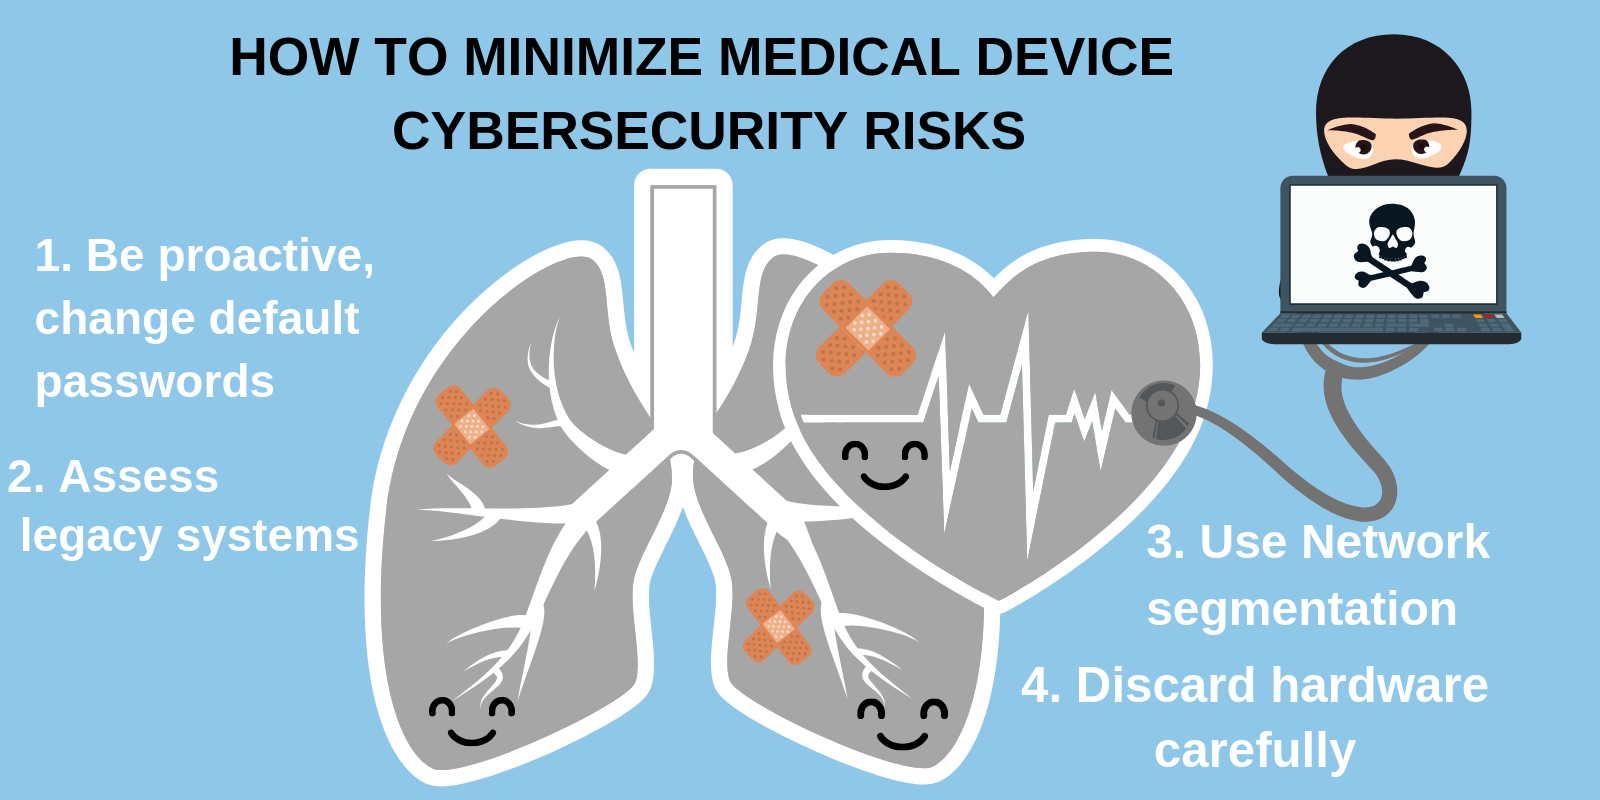 How to minimize Medical Device Cybersecurity Risks 24By7Security